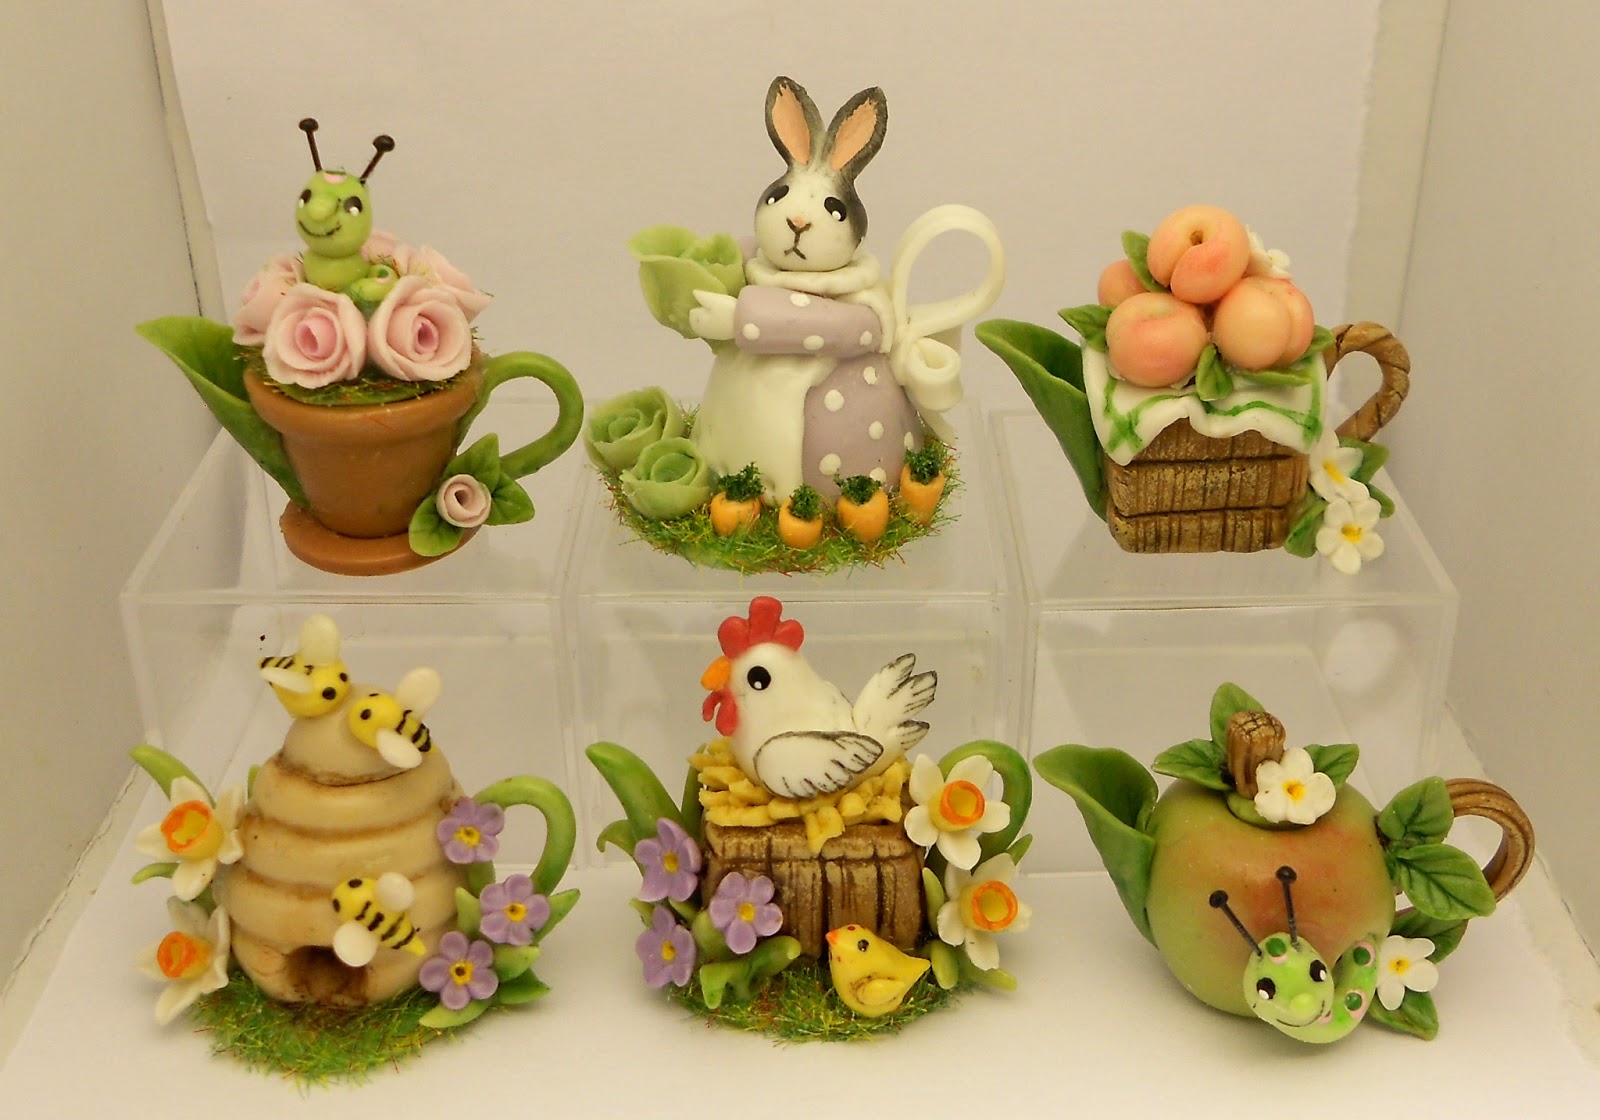 CDHM Gallery of Loredana Tonetti of Lory's Tiny Creations making all things whimsical in 1:12 scale from bunny teapots, shabby chic food accessories, tiny bird houses, dancing frogs on lilypad teapots and 1:12 foods including rustic fruits and vegetables